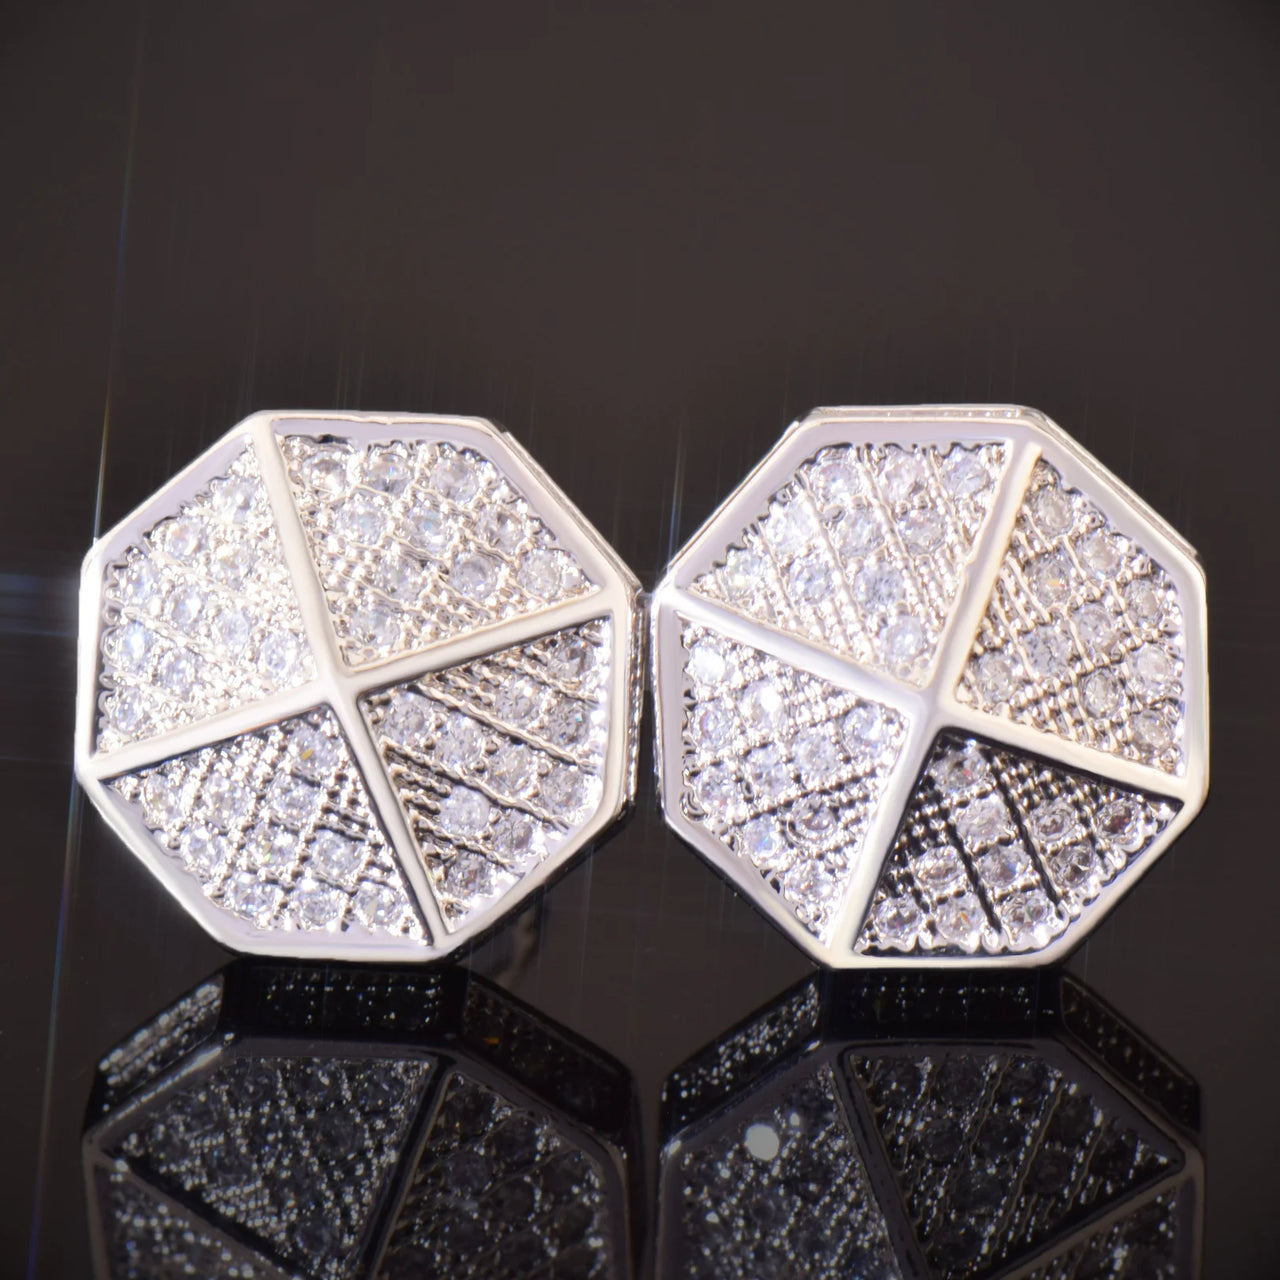 10mm Round Cut Umbrella Earrings - Different Drips